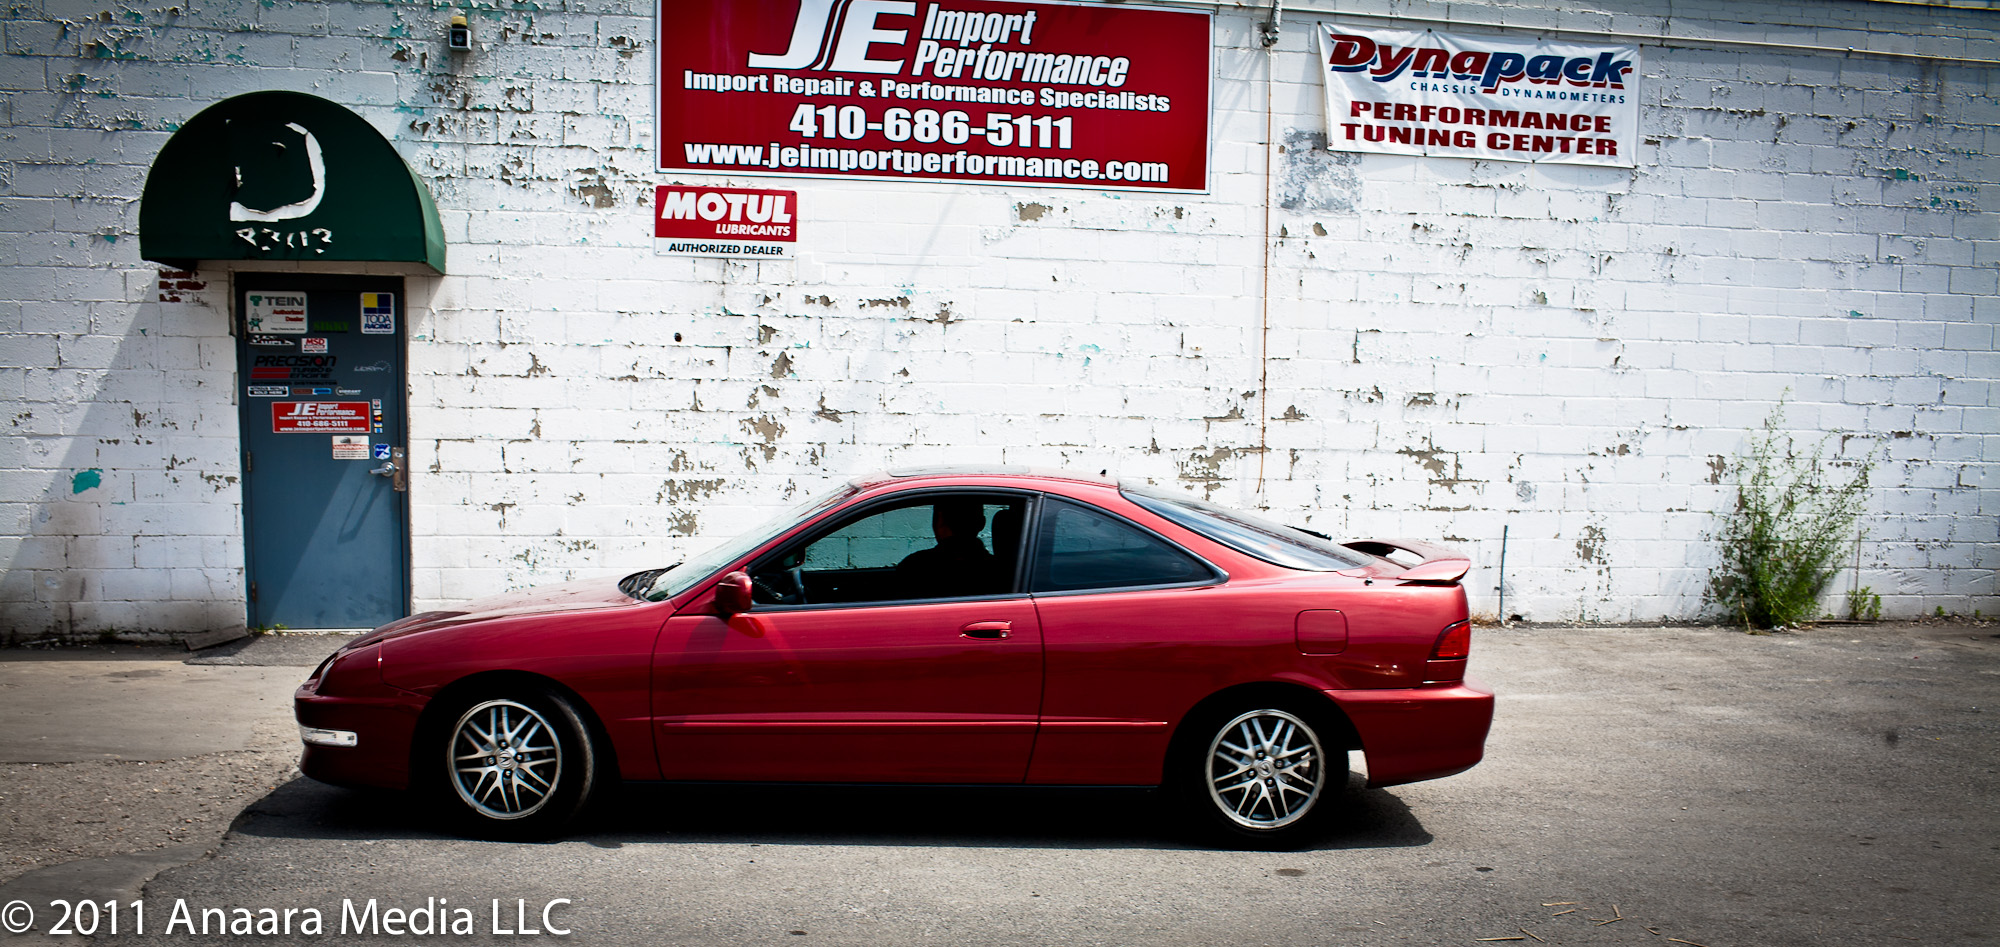 JE Import Performance bringing my teg back after a test drive. Lowered stance, stiffened suspension, sweet, low growl.